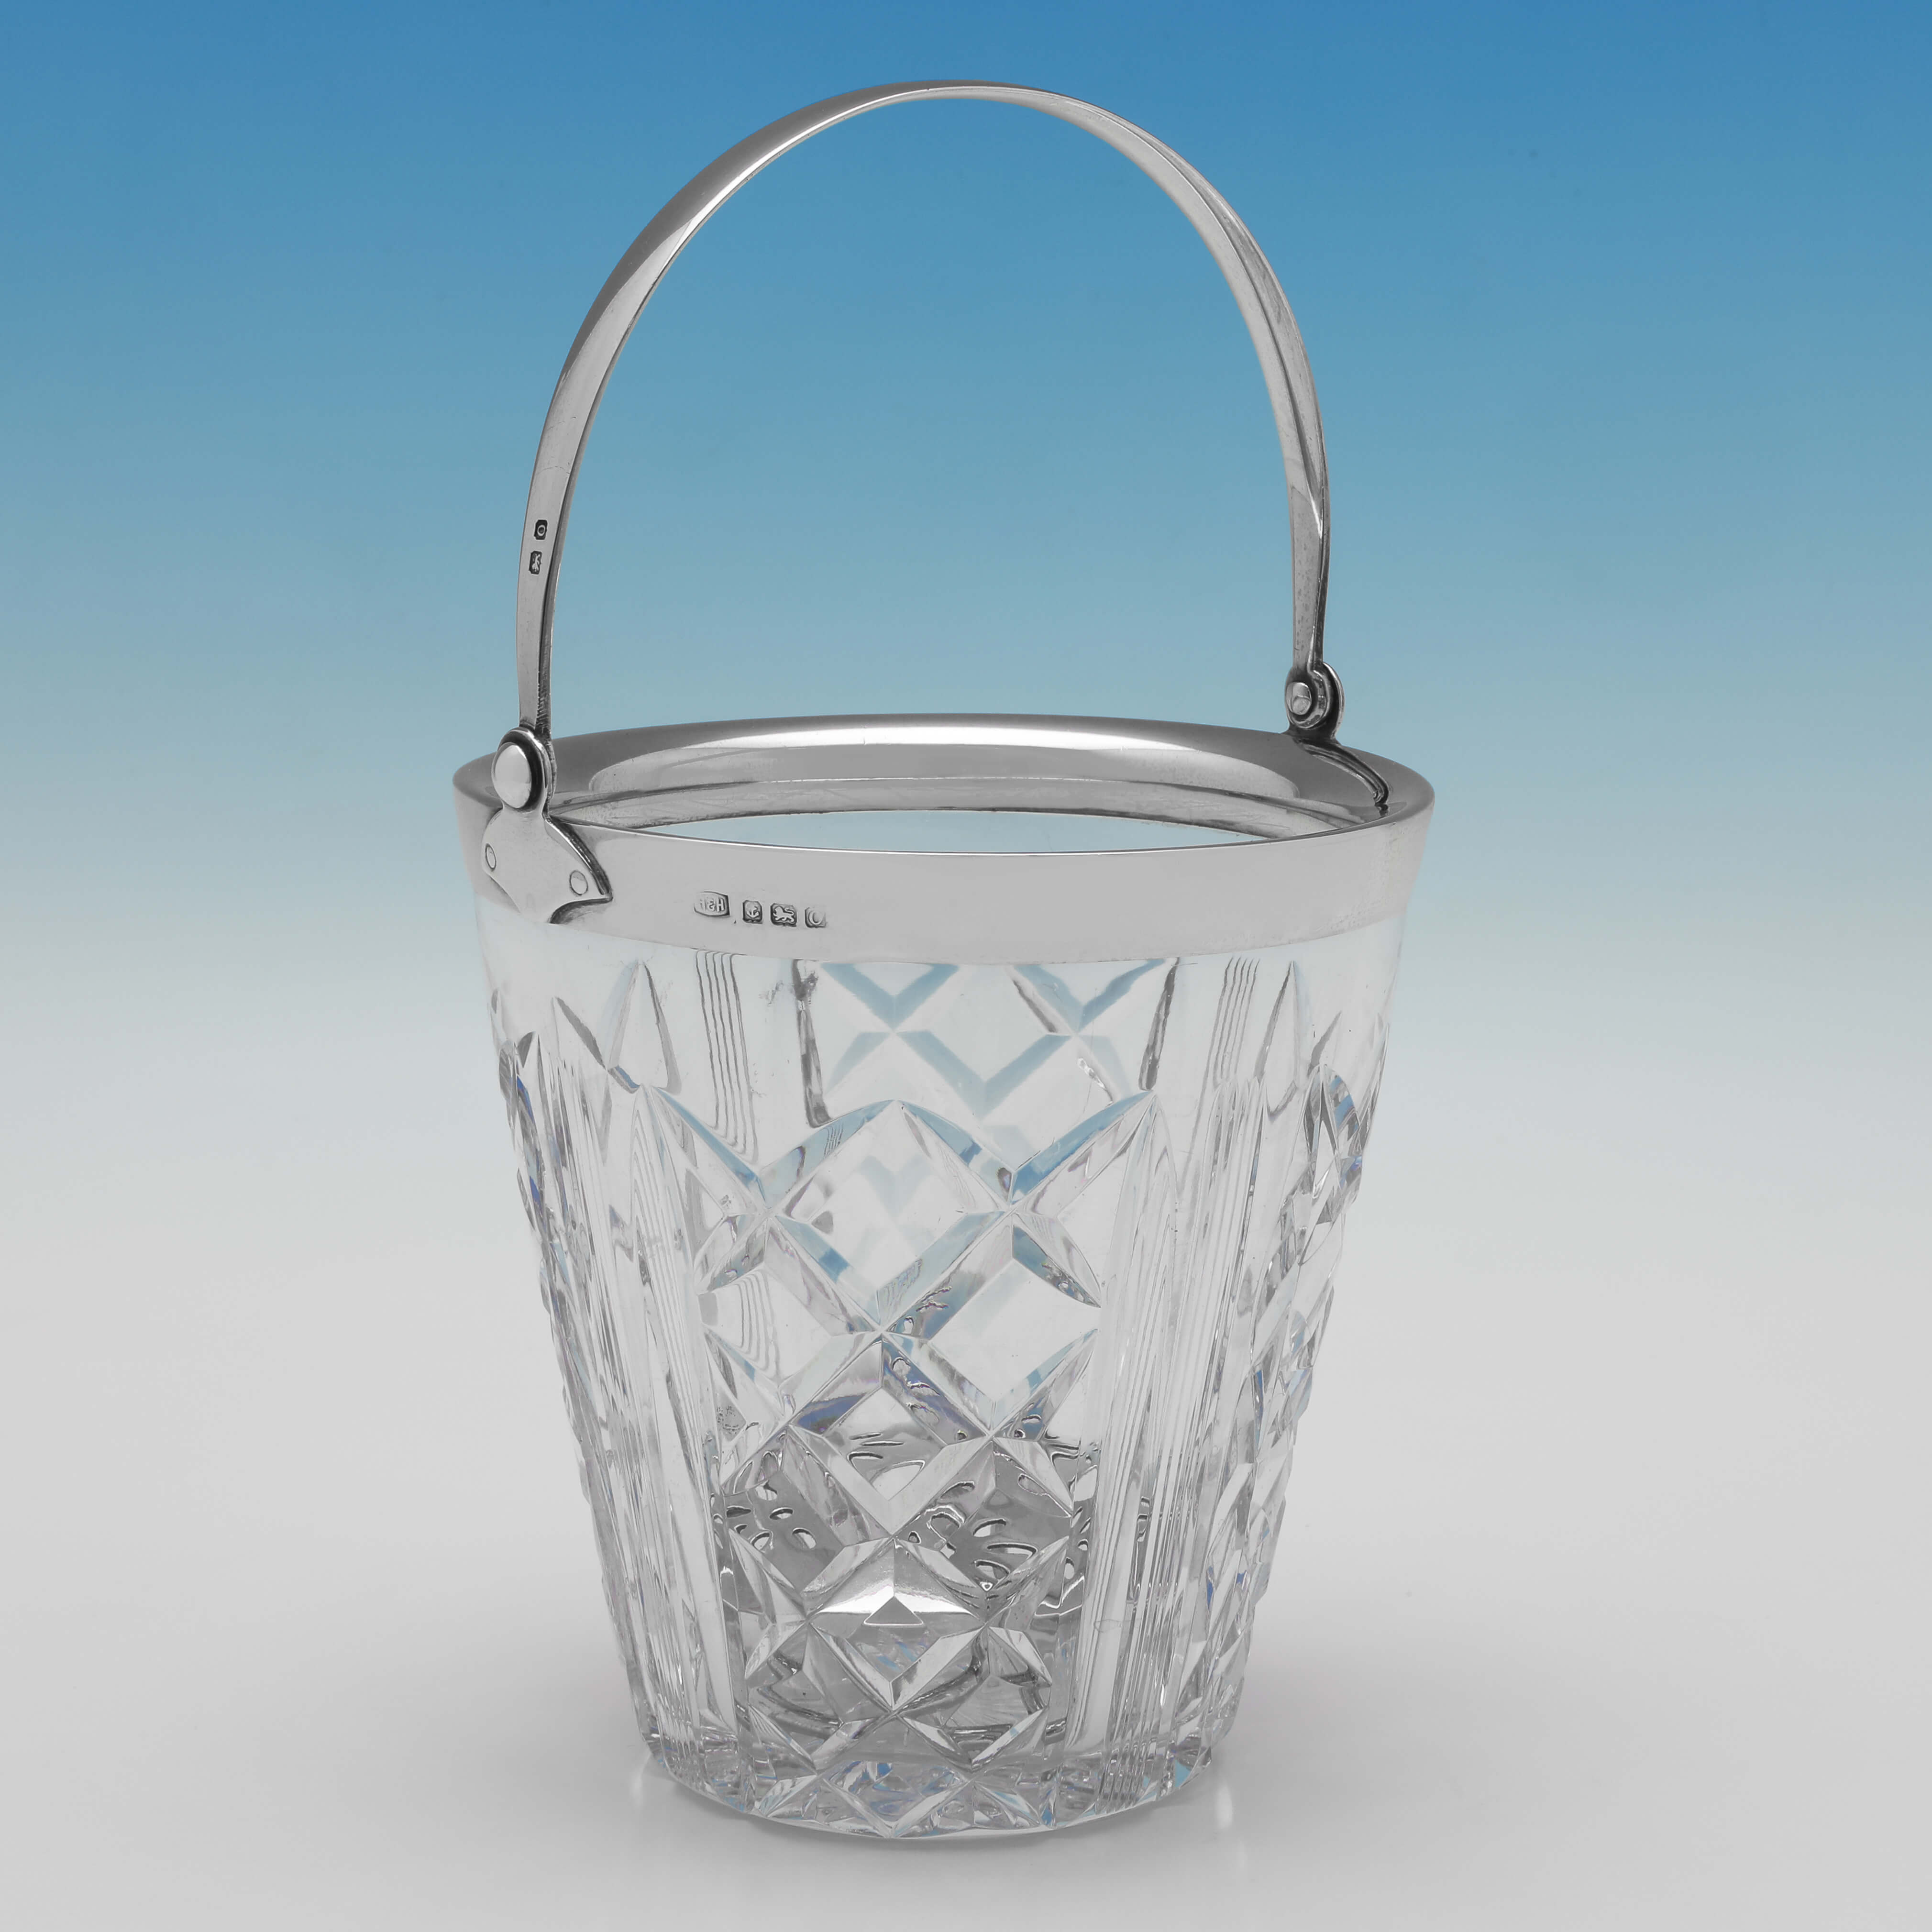 Art Deco Period Glass & Sterling Silver Ice Bucket with Strainer, London, 1938